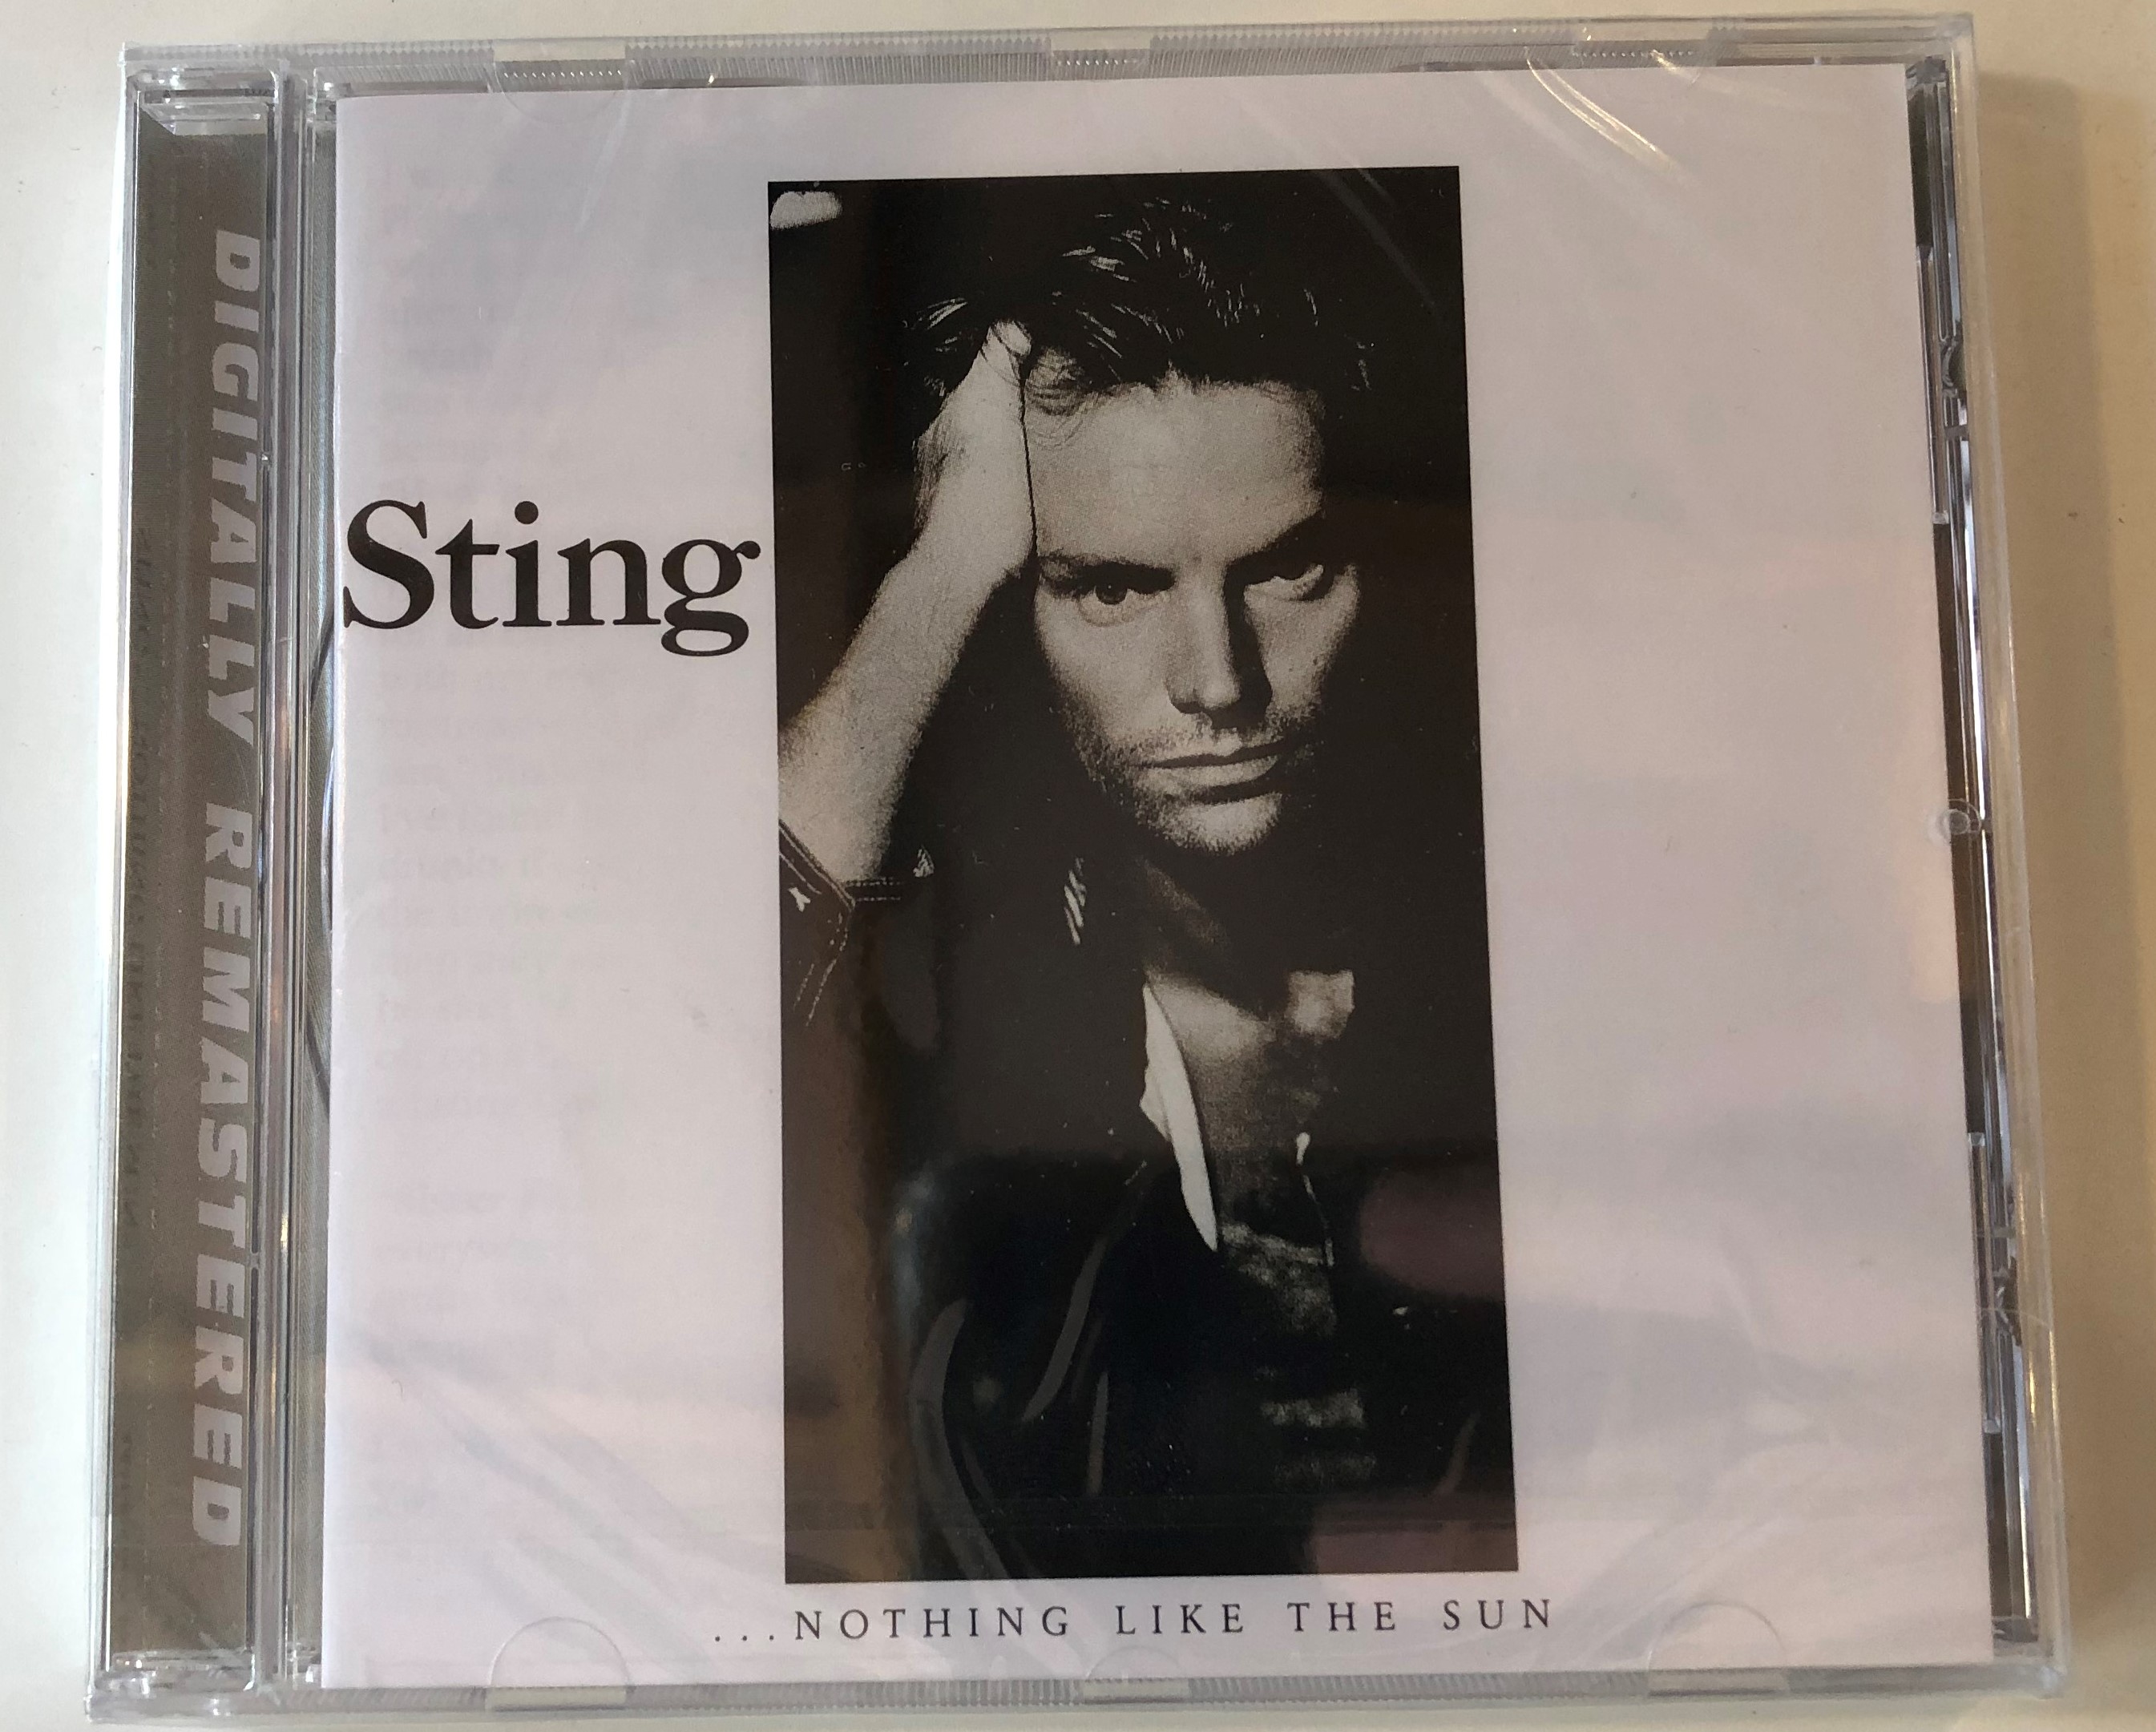 sting-...nothing-like-the-sun-digitally-remastered-a-m-records-audio-cd-1998-540-993-2-1-.jpg